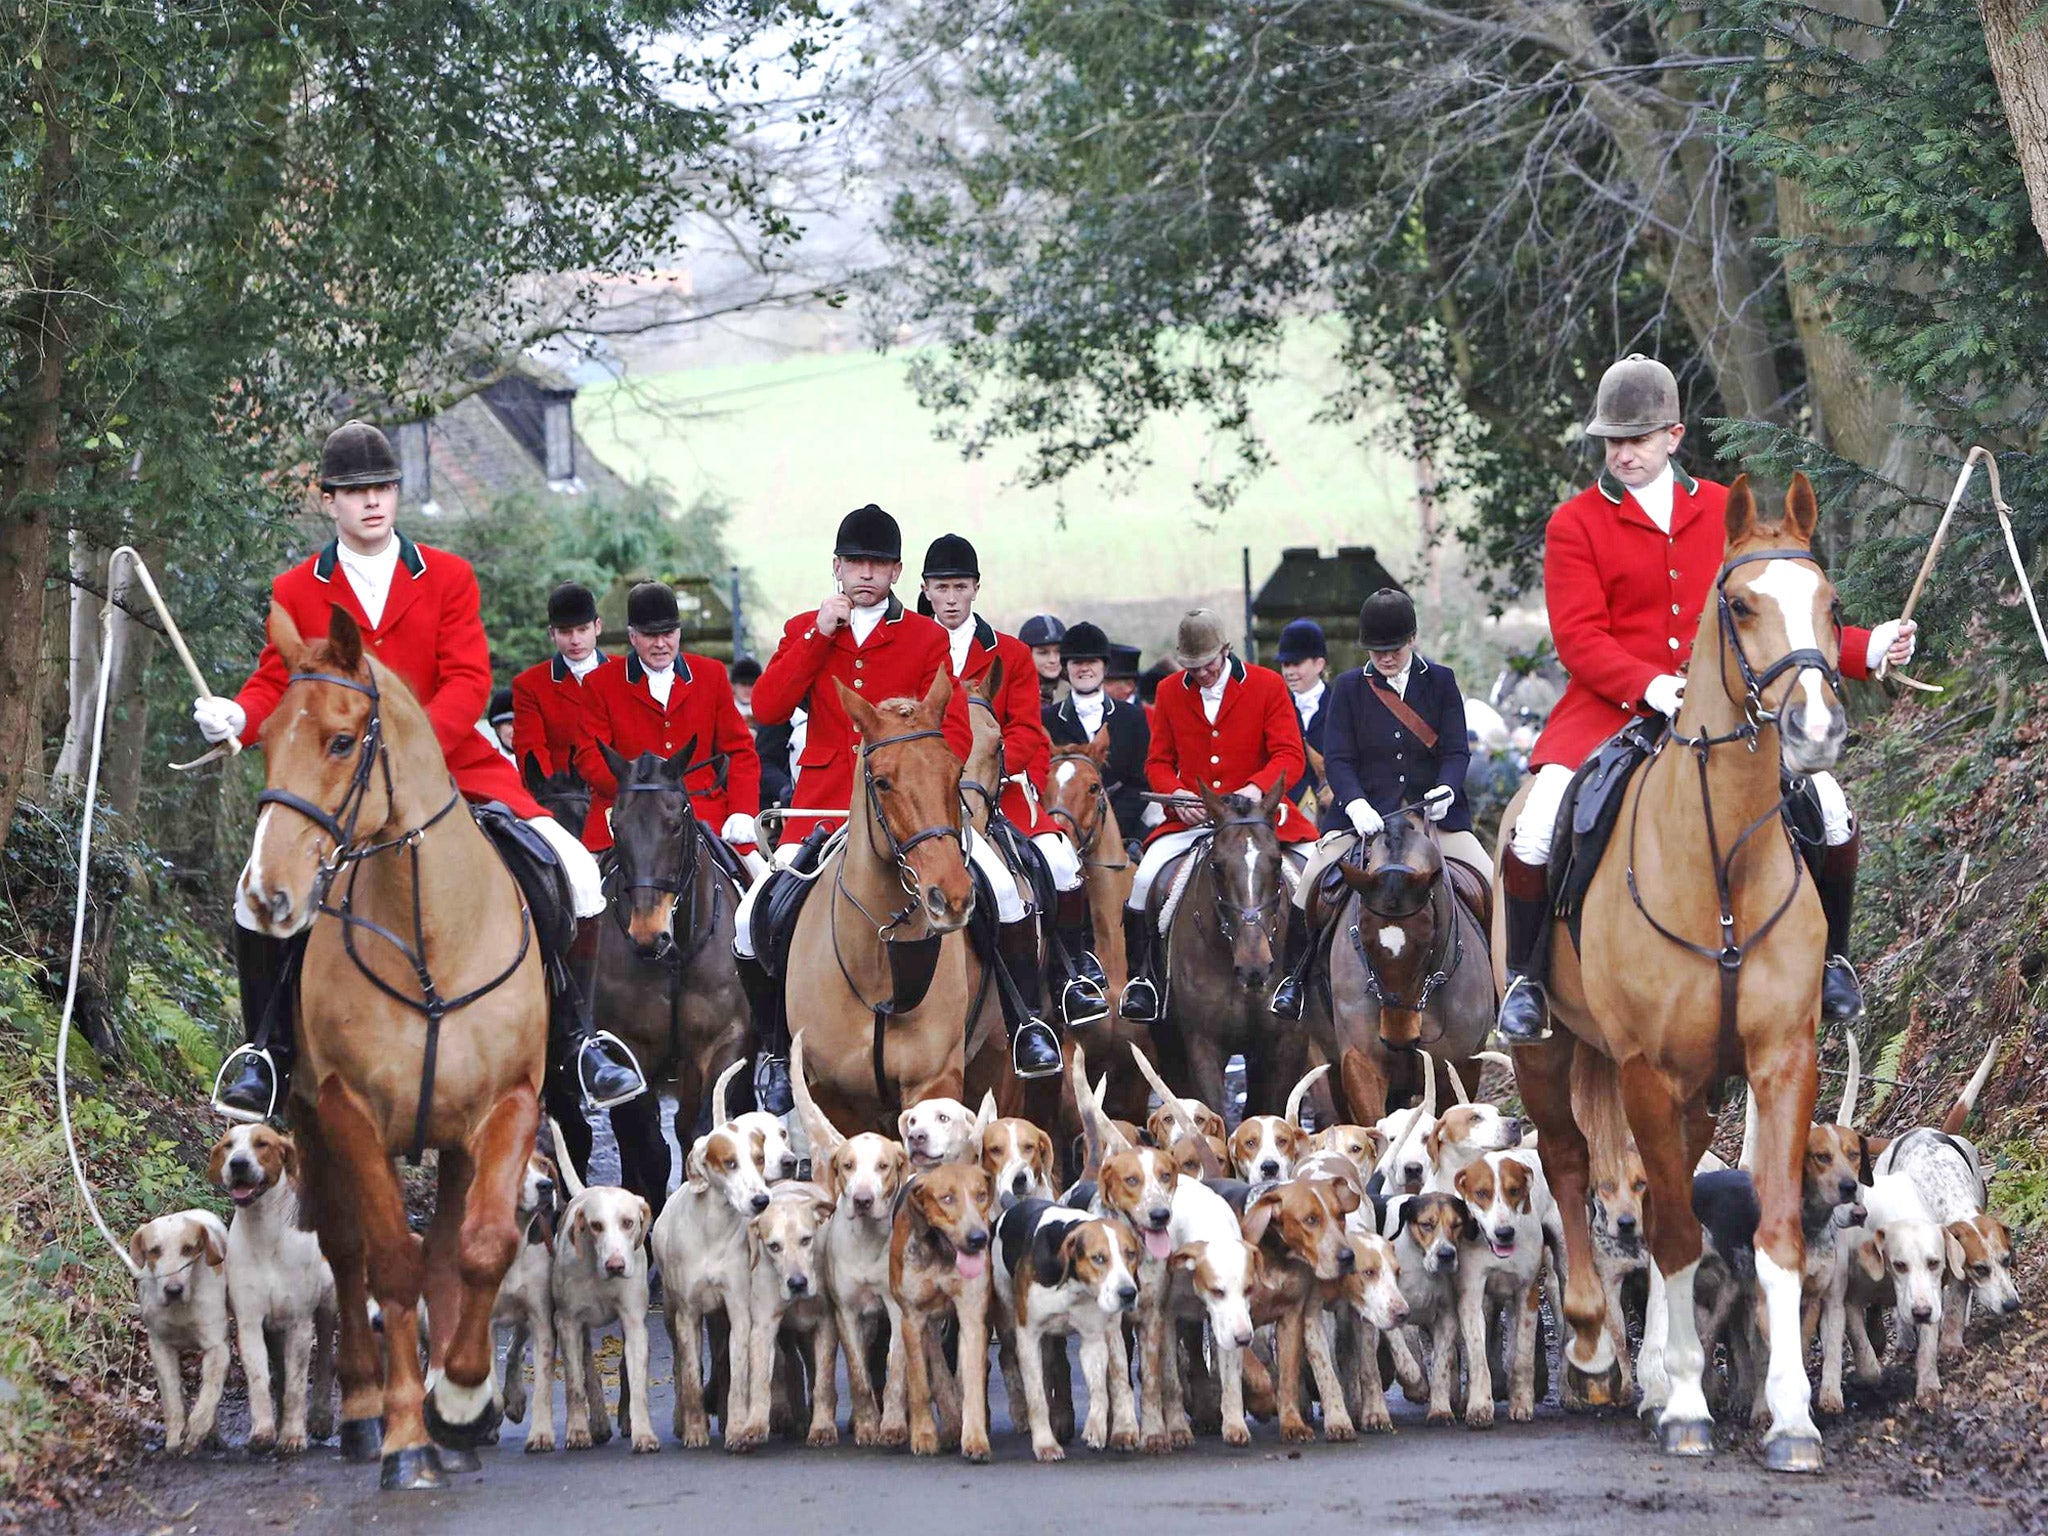 Members of the Old Surrey Burstow and West Kent Hunt departing from Chiddingstone